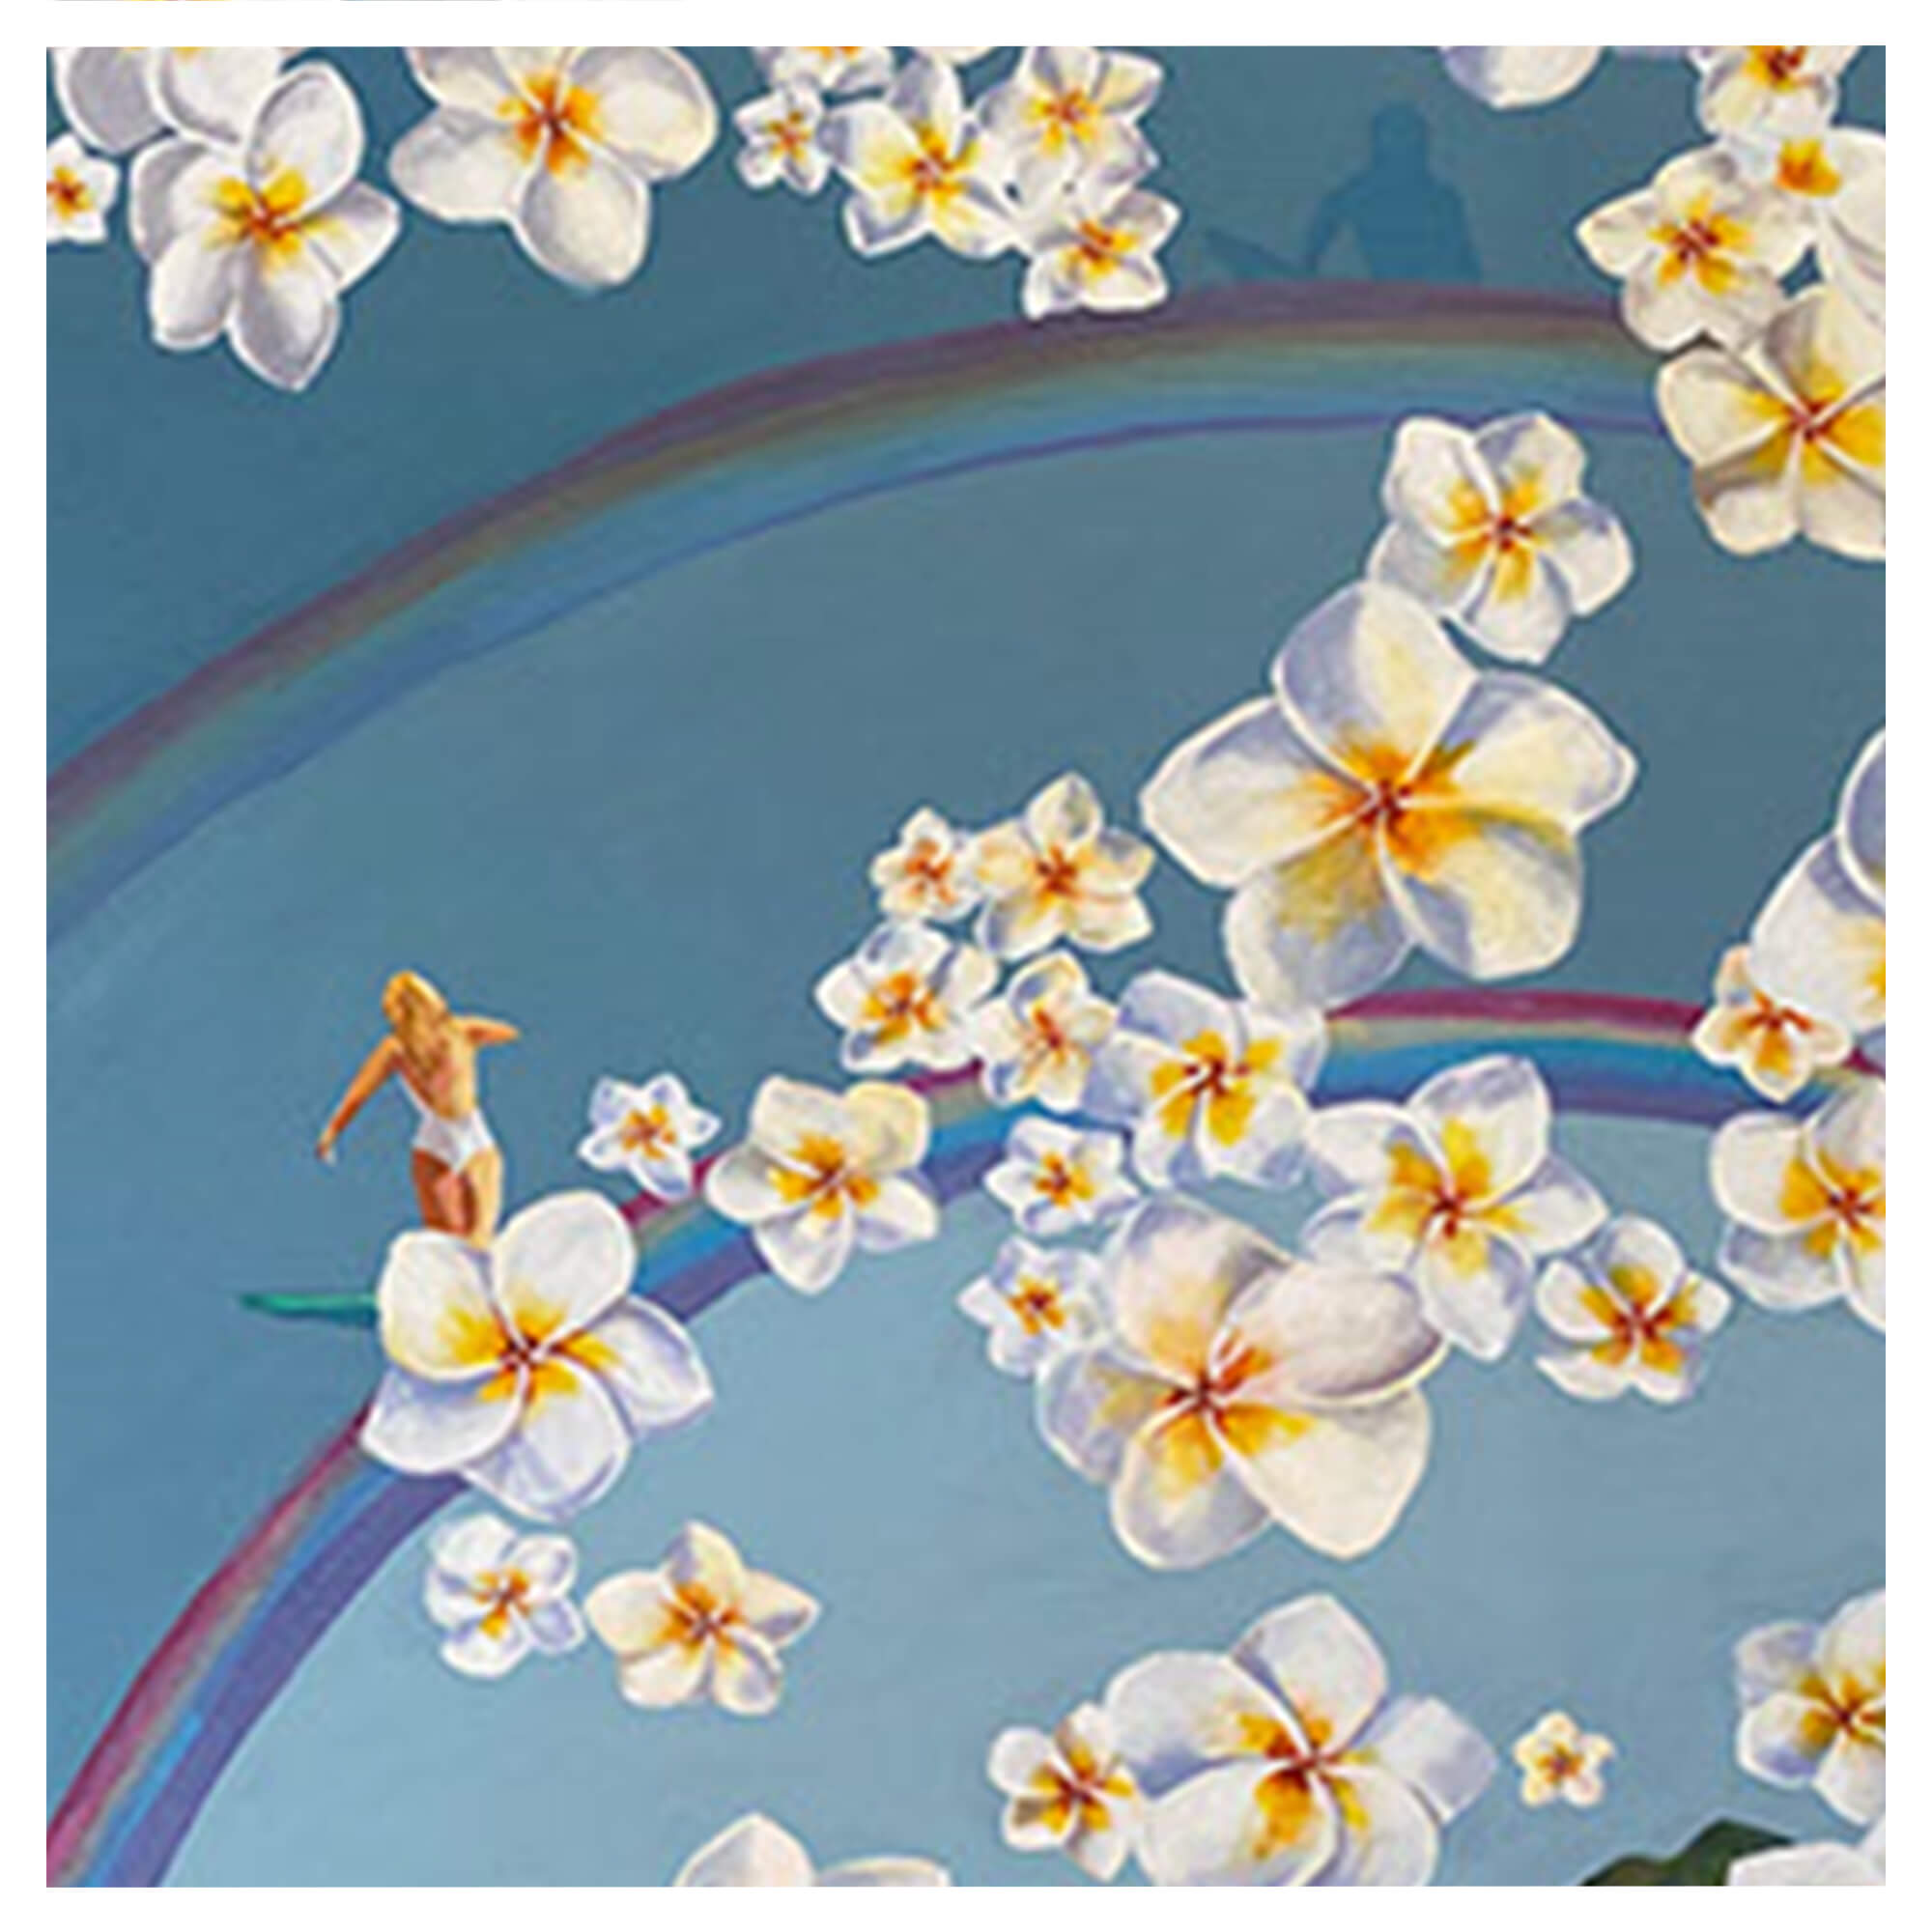 Close up details of artwork Over the Rainbow by Hawaii artist Jackie Eitel